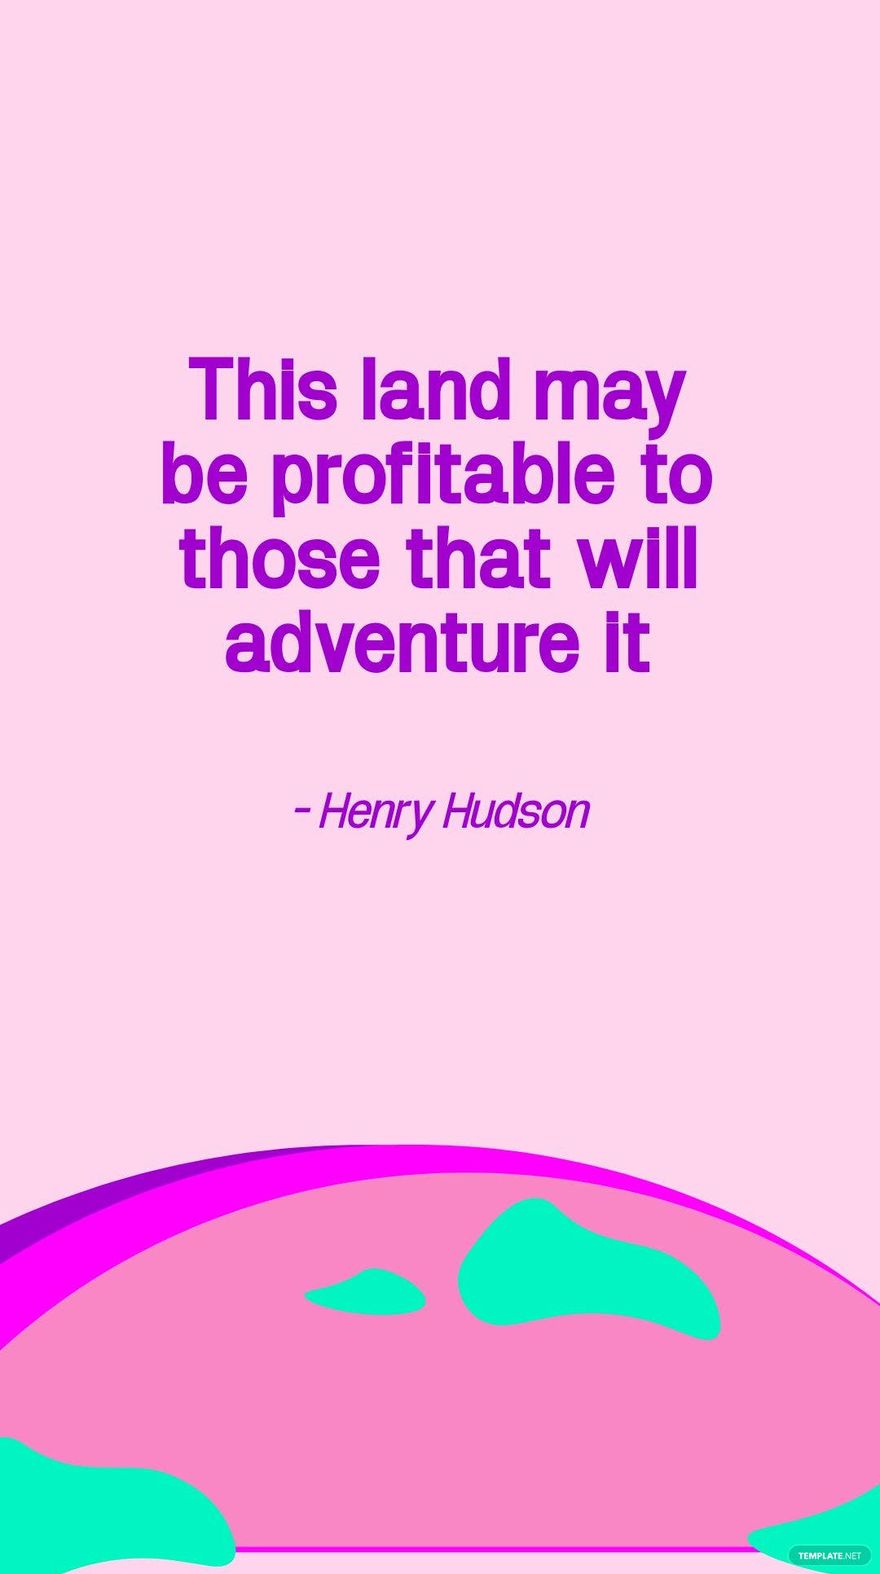 Henry Hudson - This land may be profitable to those that will adventure it